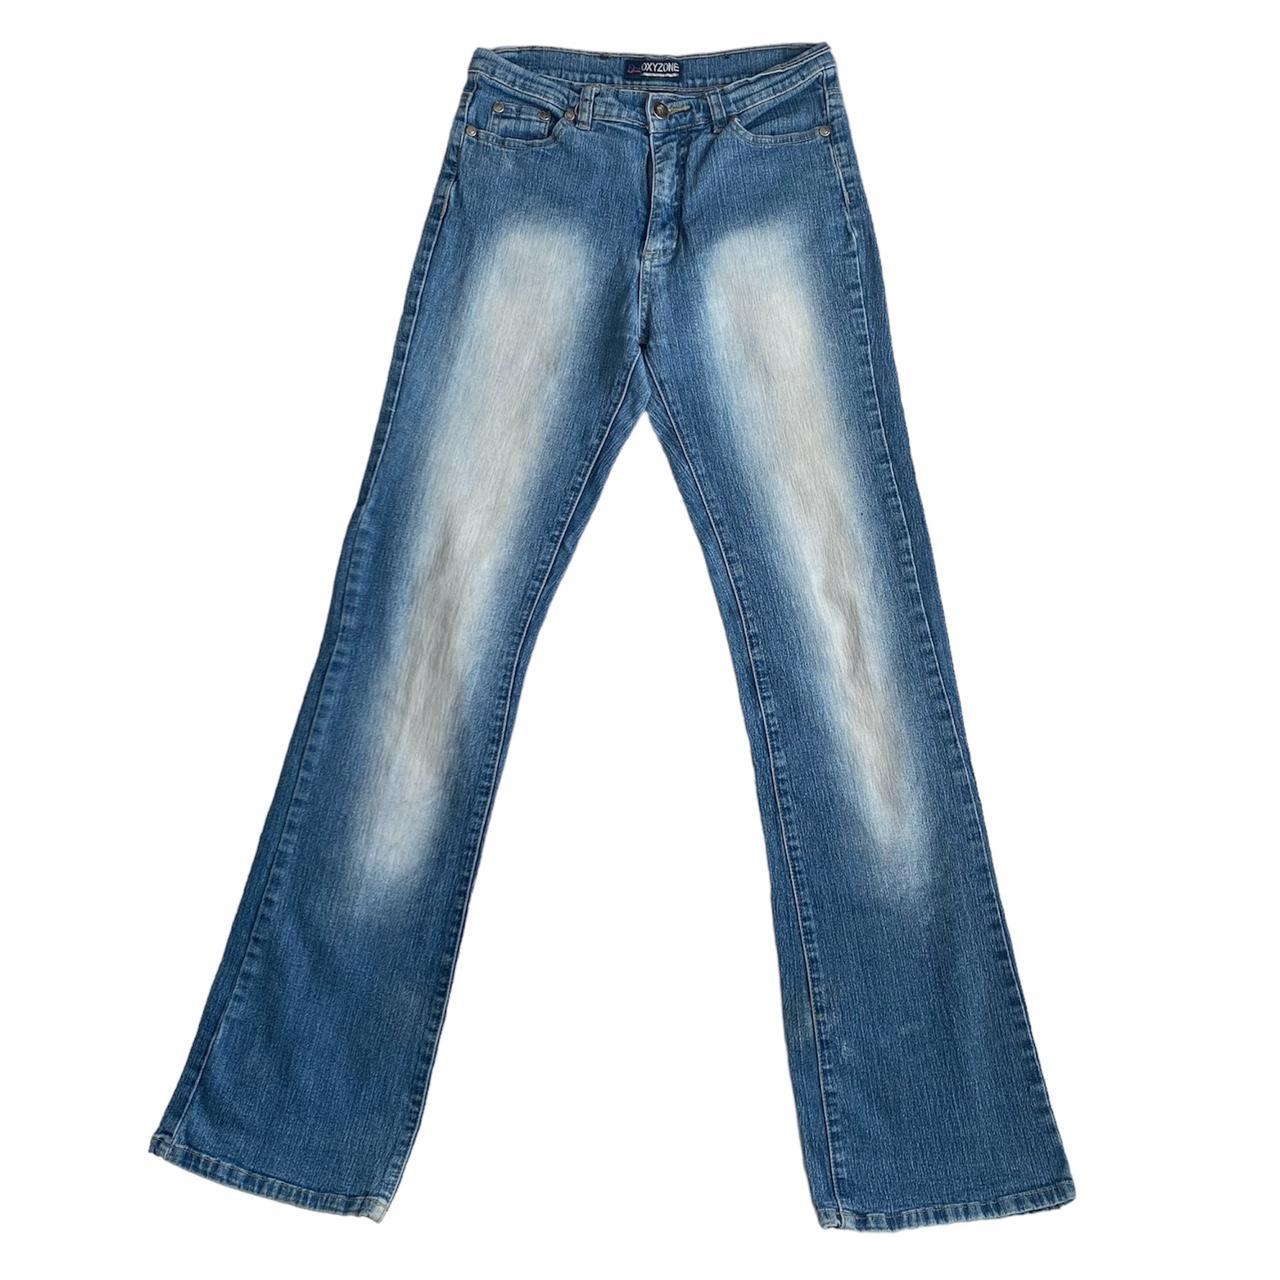 Iconic vintage Y2K faded denim jeans Sexy bootcut... - Depop